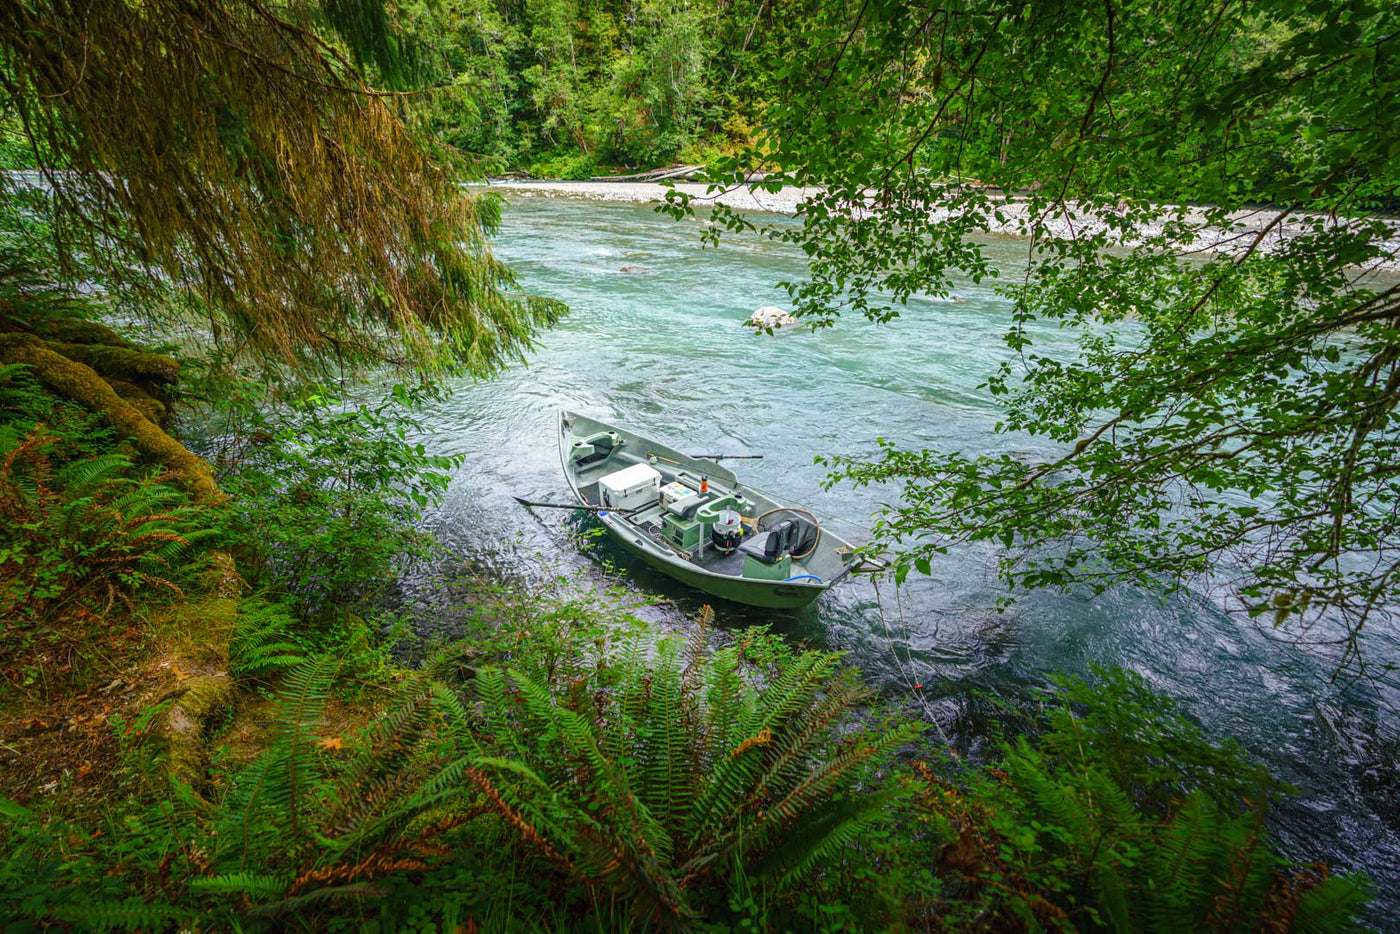 OLYMPIC NATIONAL PARK & RAIN FOREST PHOTOGRAPHY / SIGHTSEEING TOUR